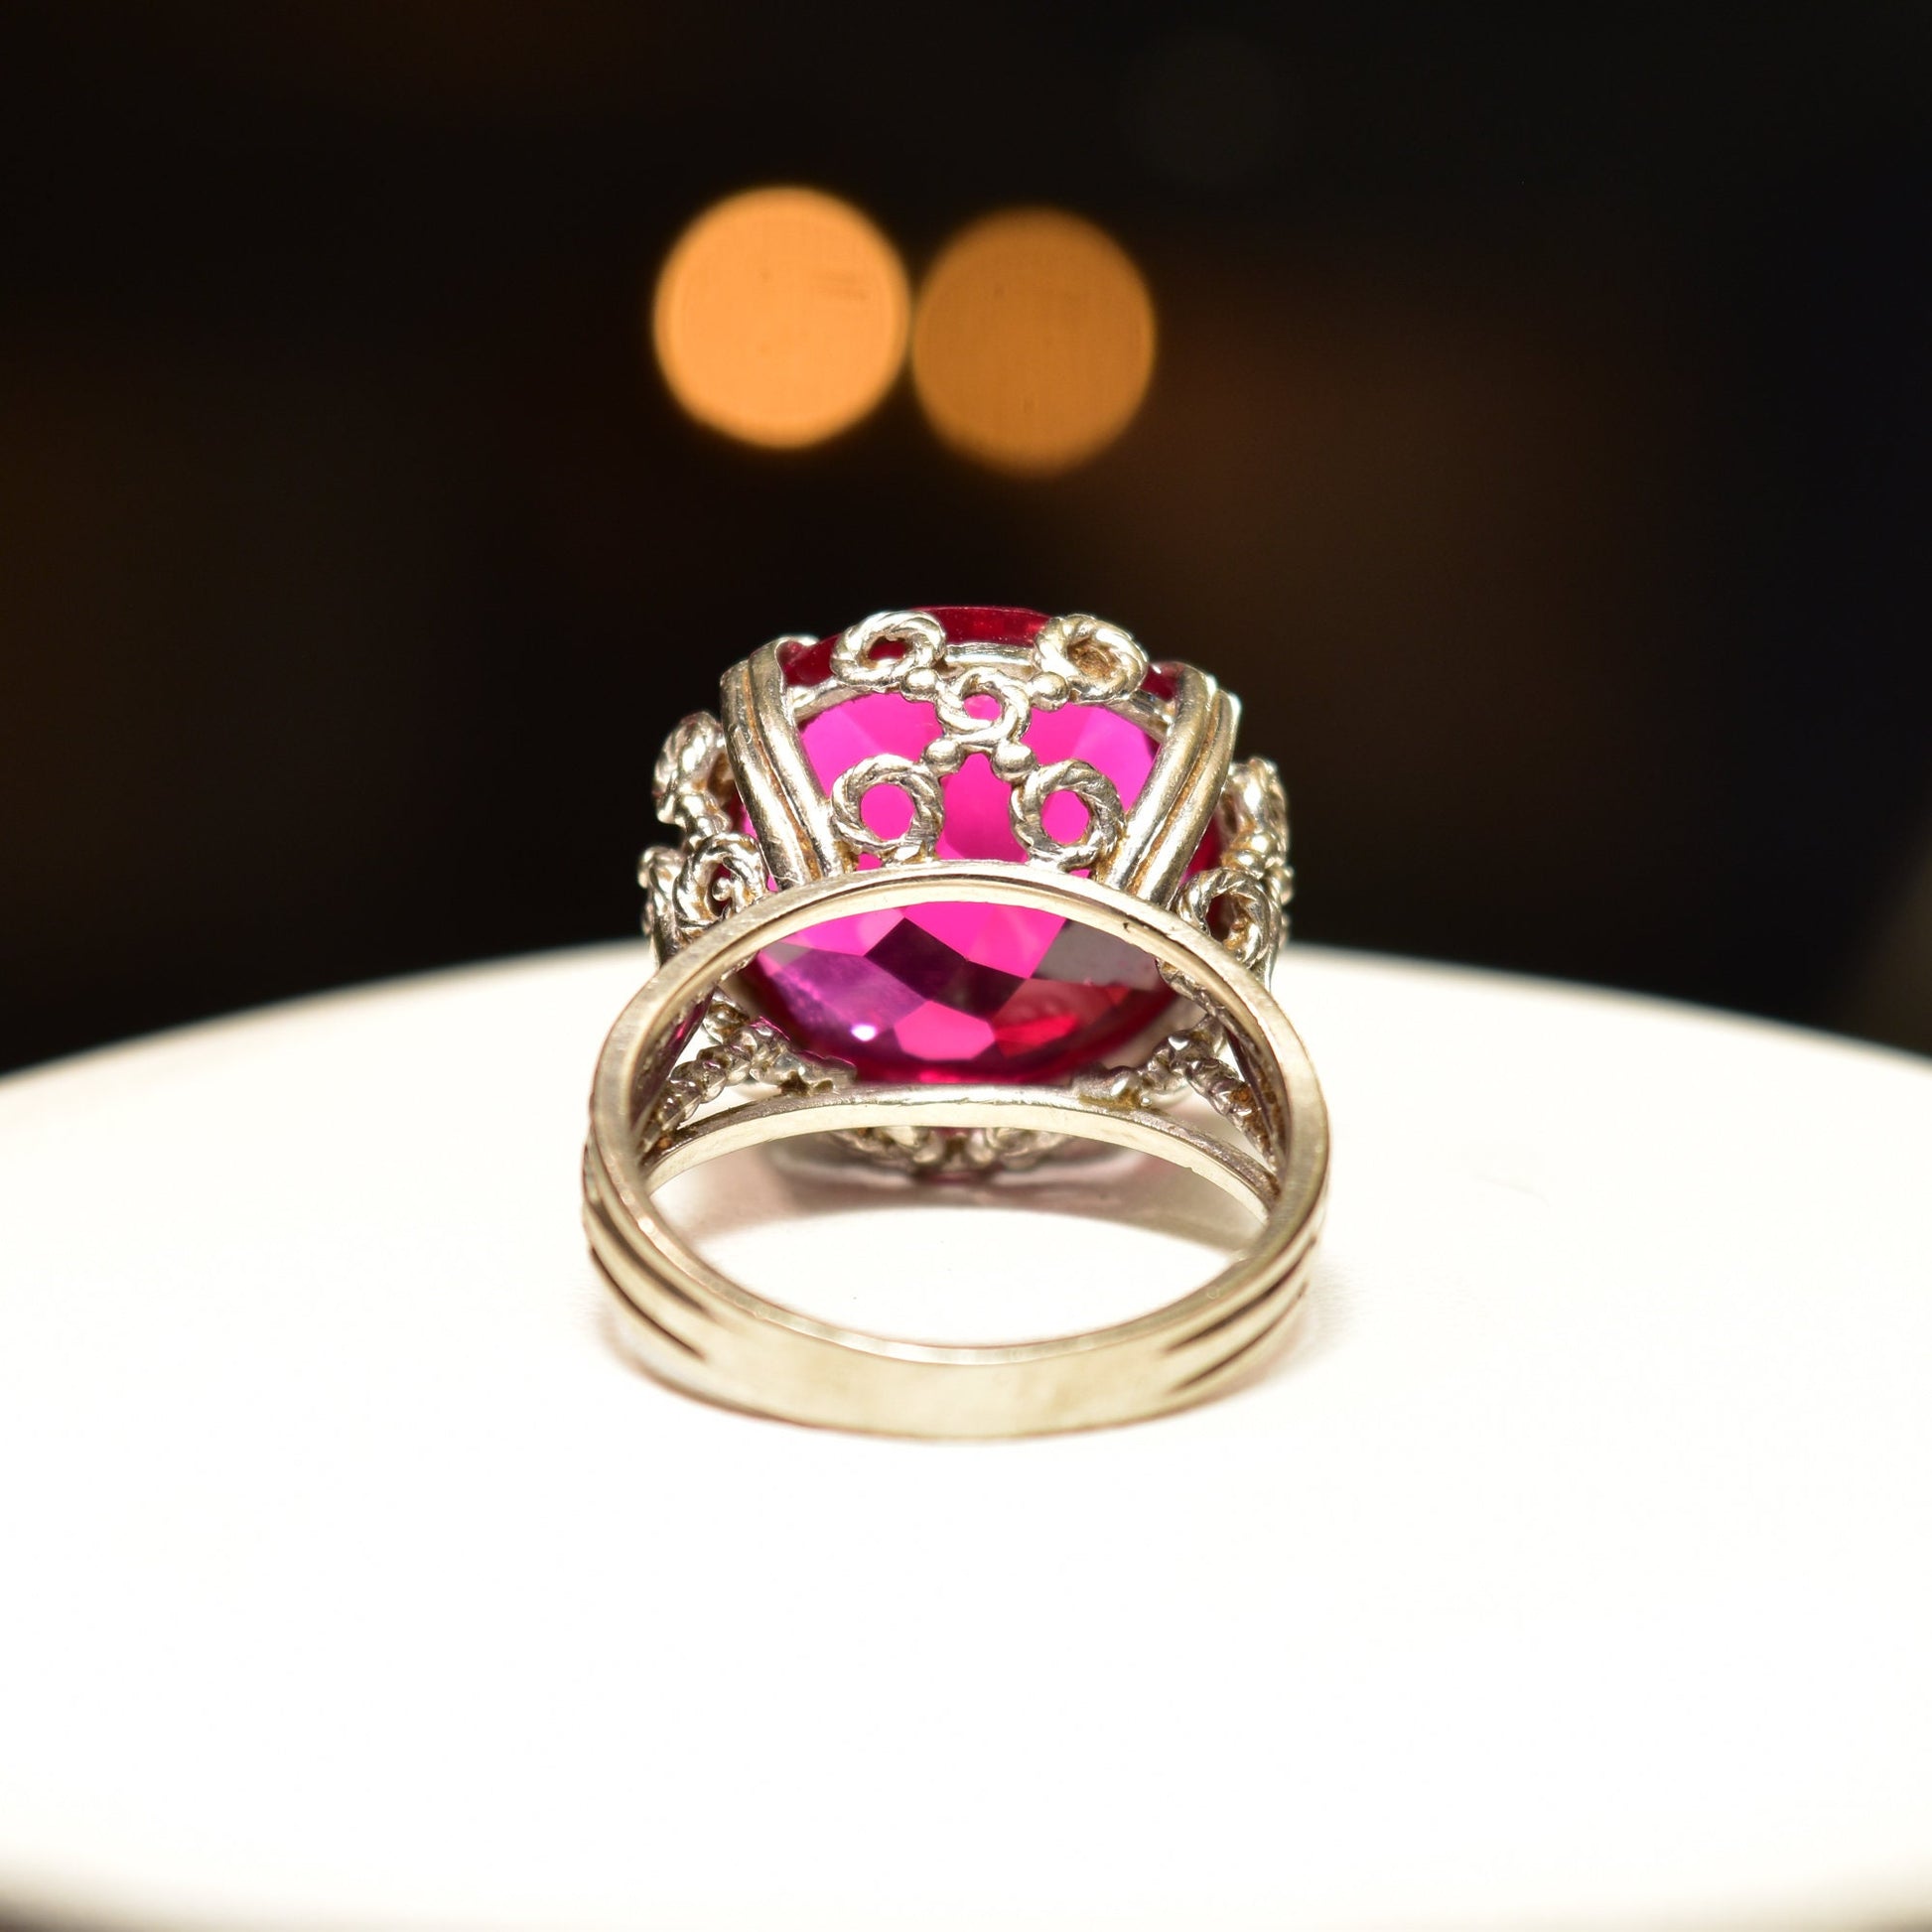 10K white gold pink ruby cocktail ring with ornate filigree setting, featuring a synthetic ruby gemstone. Art Deco style ring in a size 6 3/4 US.